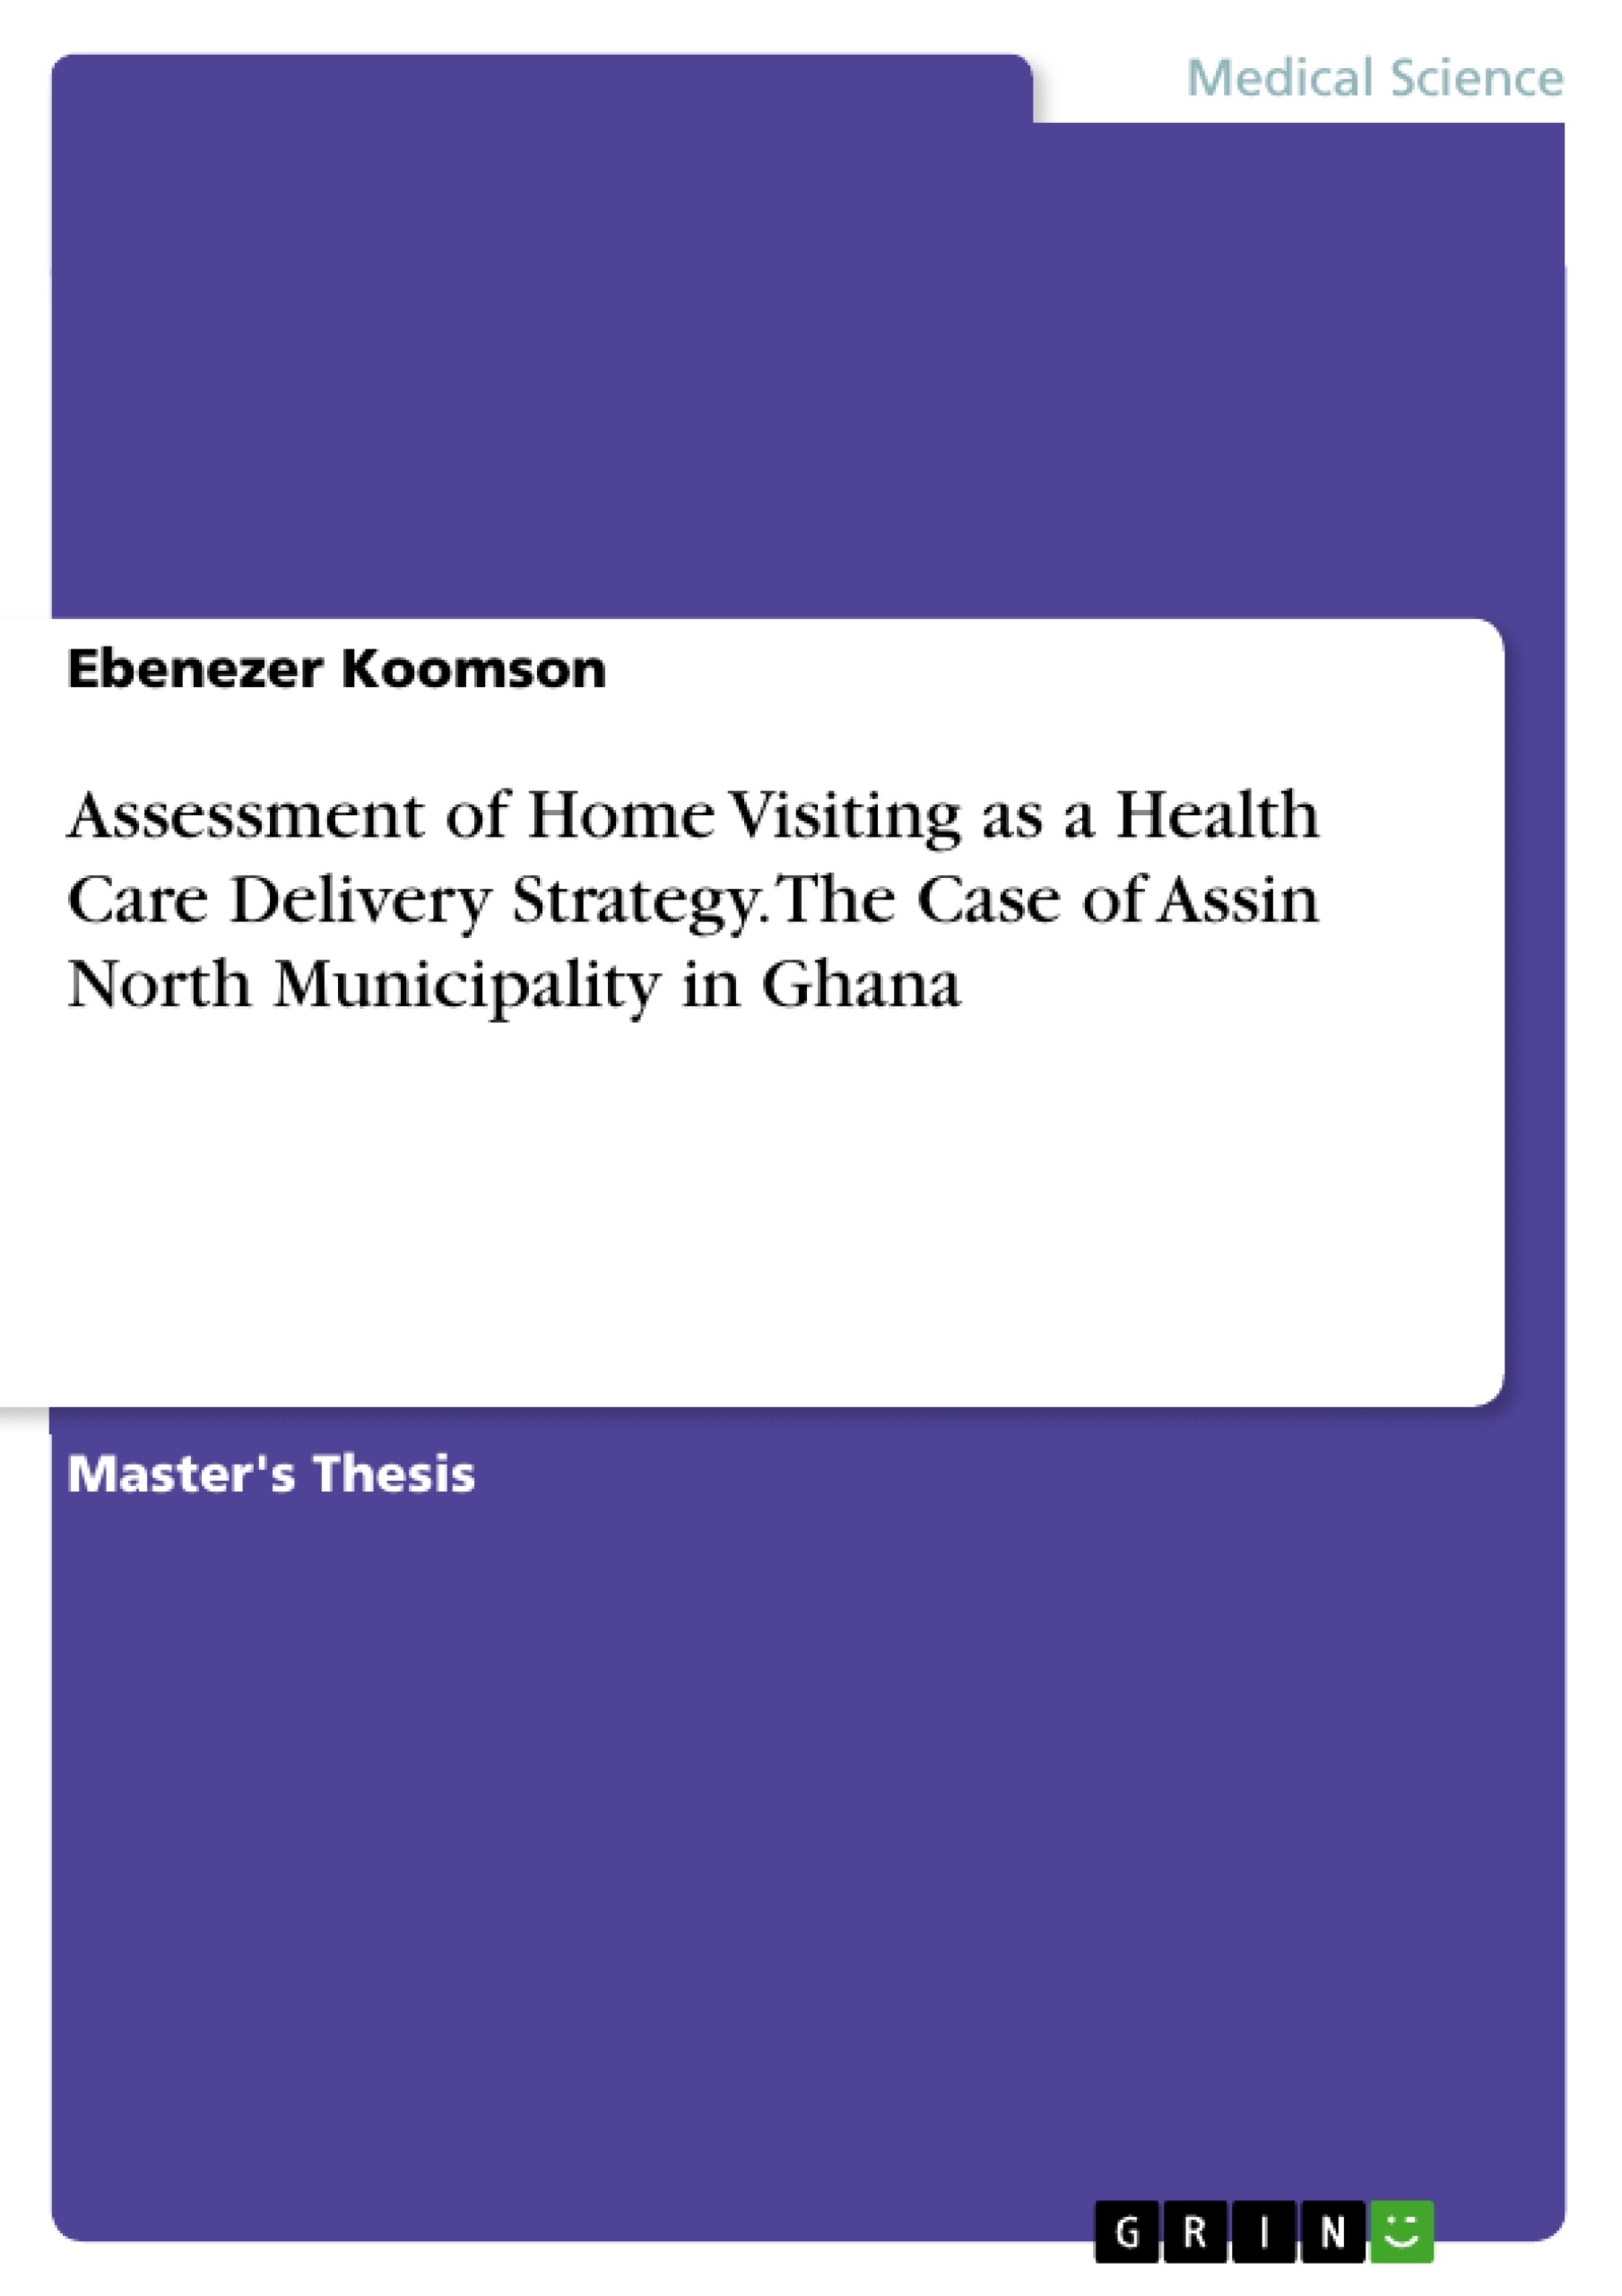 Title: Assessment of Home Visiting as a Health Care Delivery Strategy. The Case of Assin North Municipality in Ghana